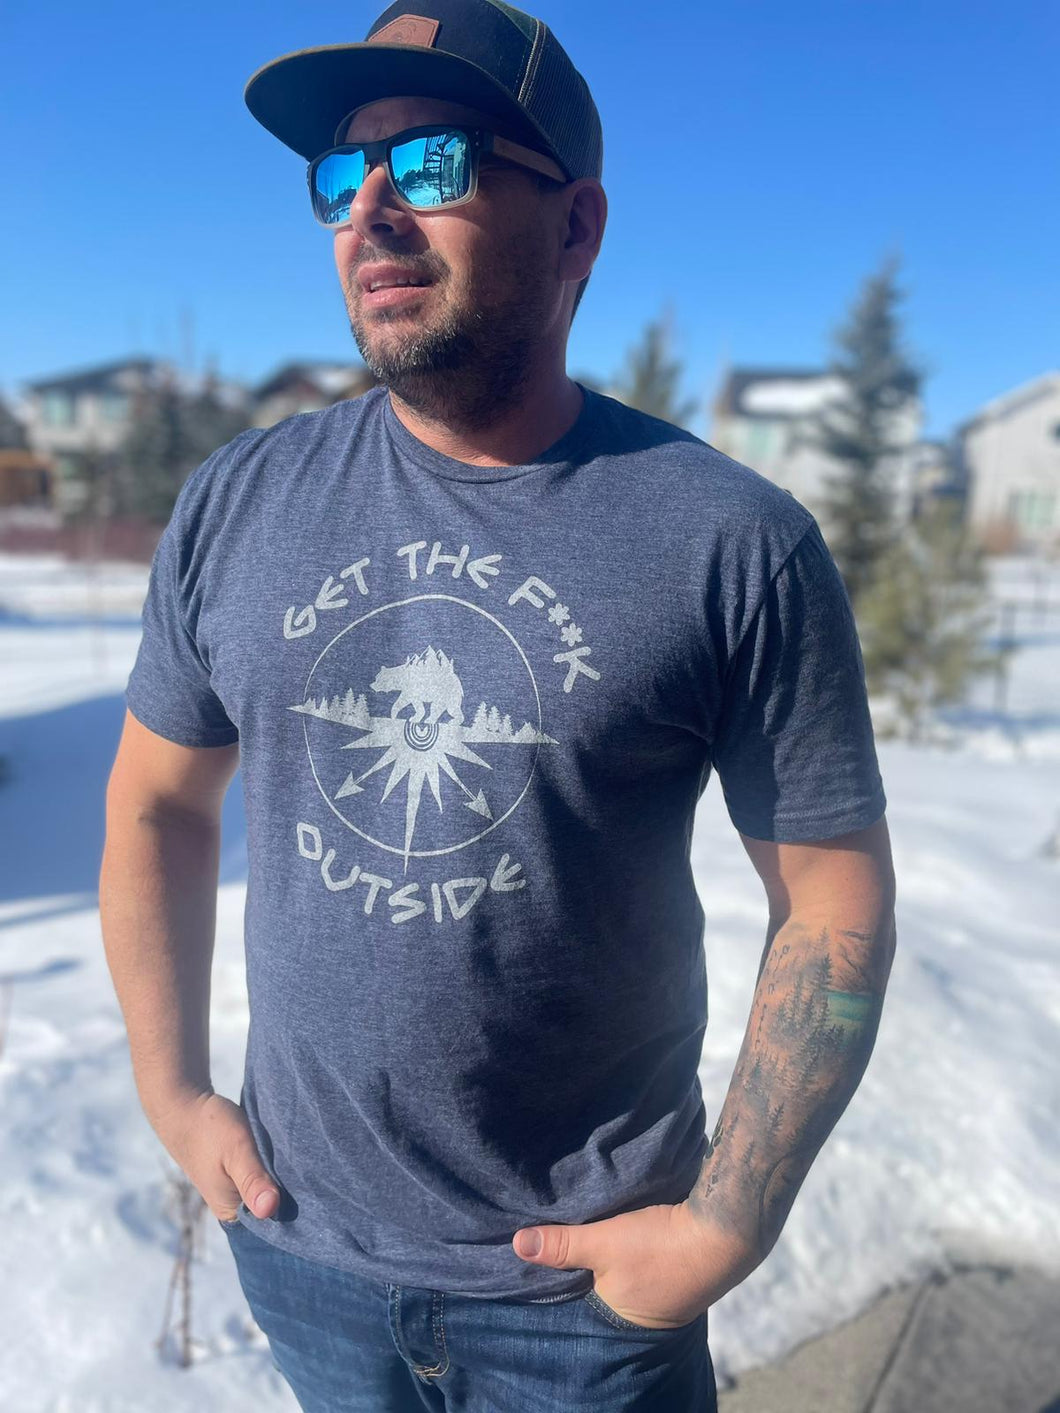 unisex heather navy tee with white be bold get the f outside logo. logo with bear, mountains, trees and compass. ladies shirt. mens t-shirt.